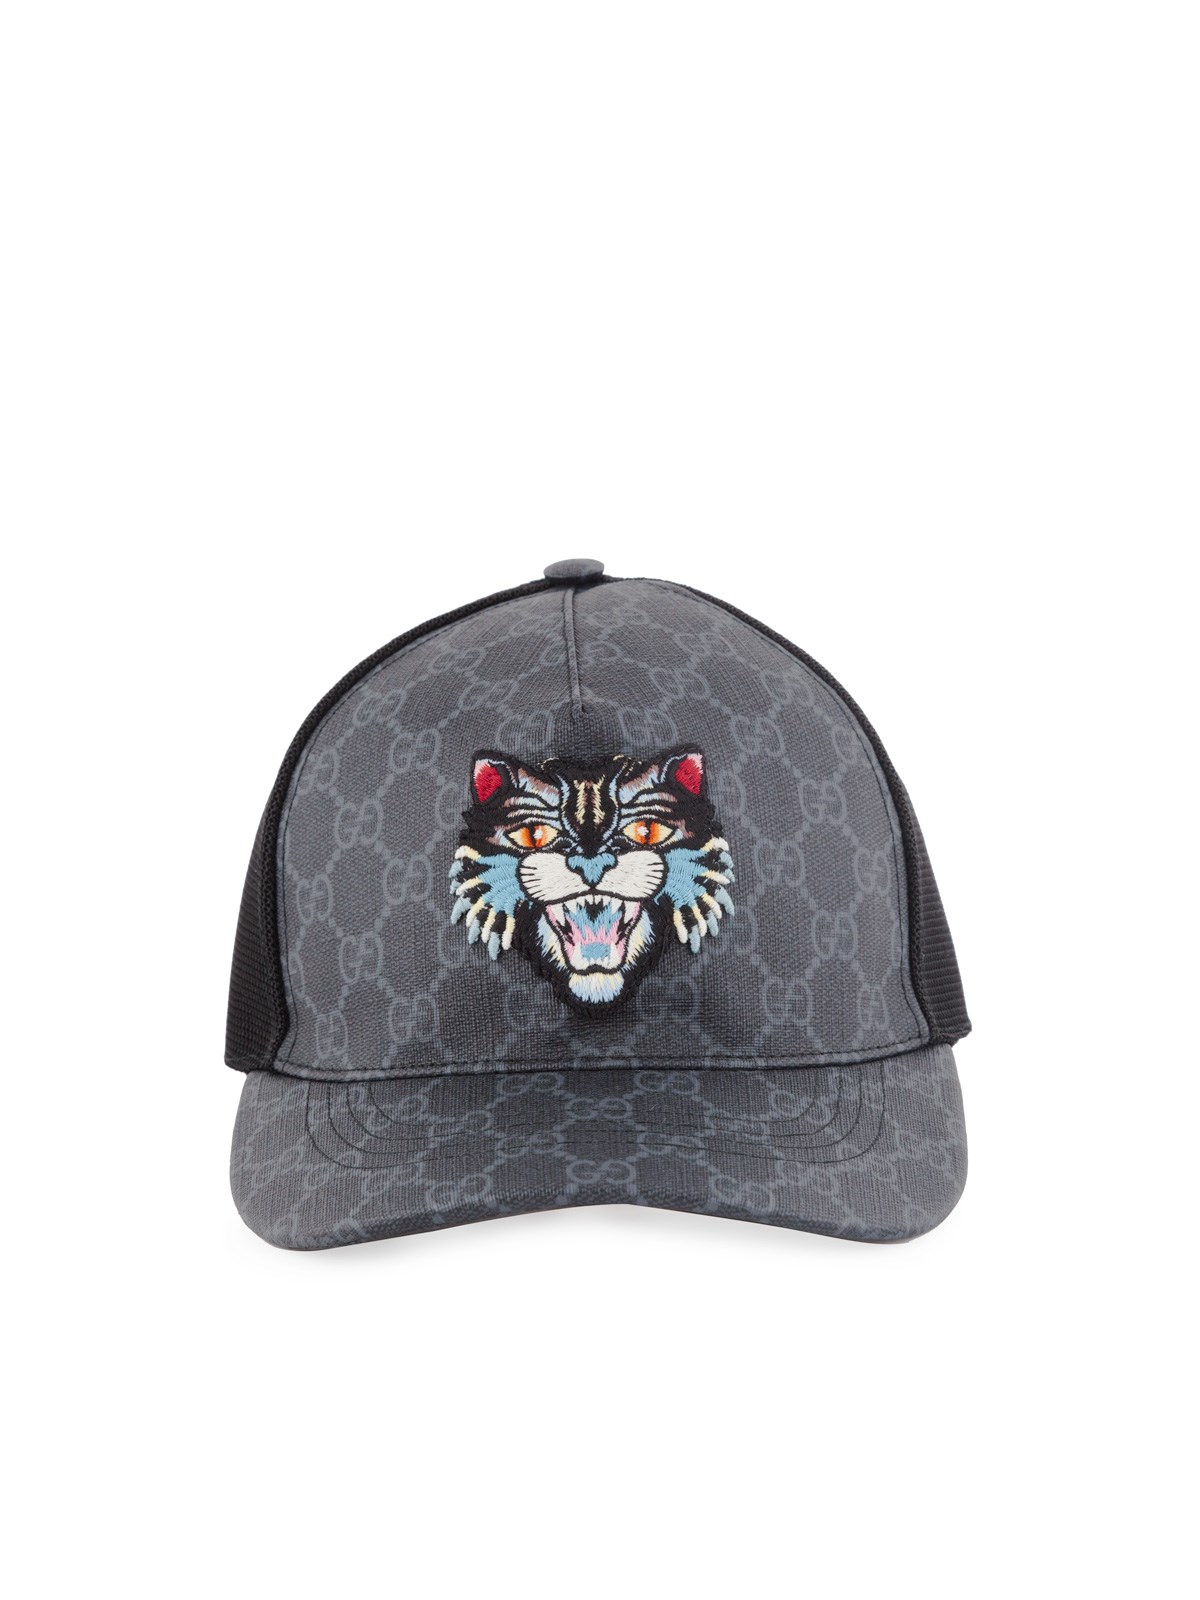 gucci GG SUPREME ANGRY CAT BASEBALL available montiboutique.com -